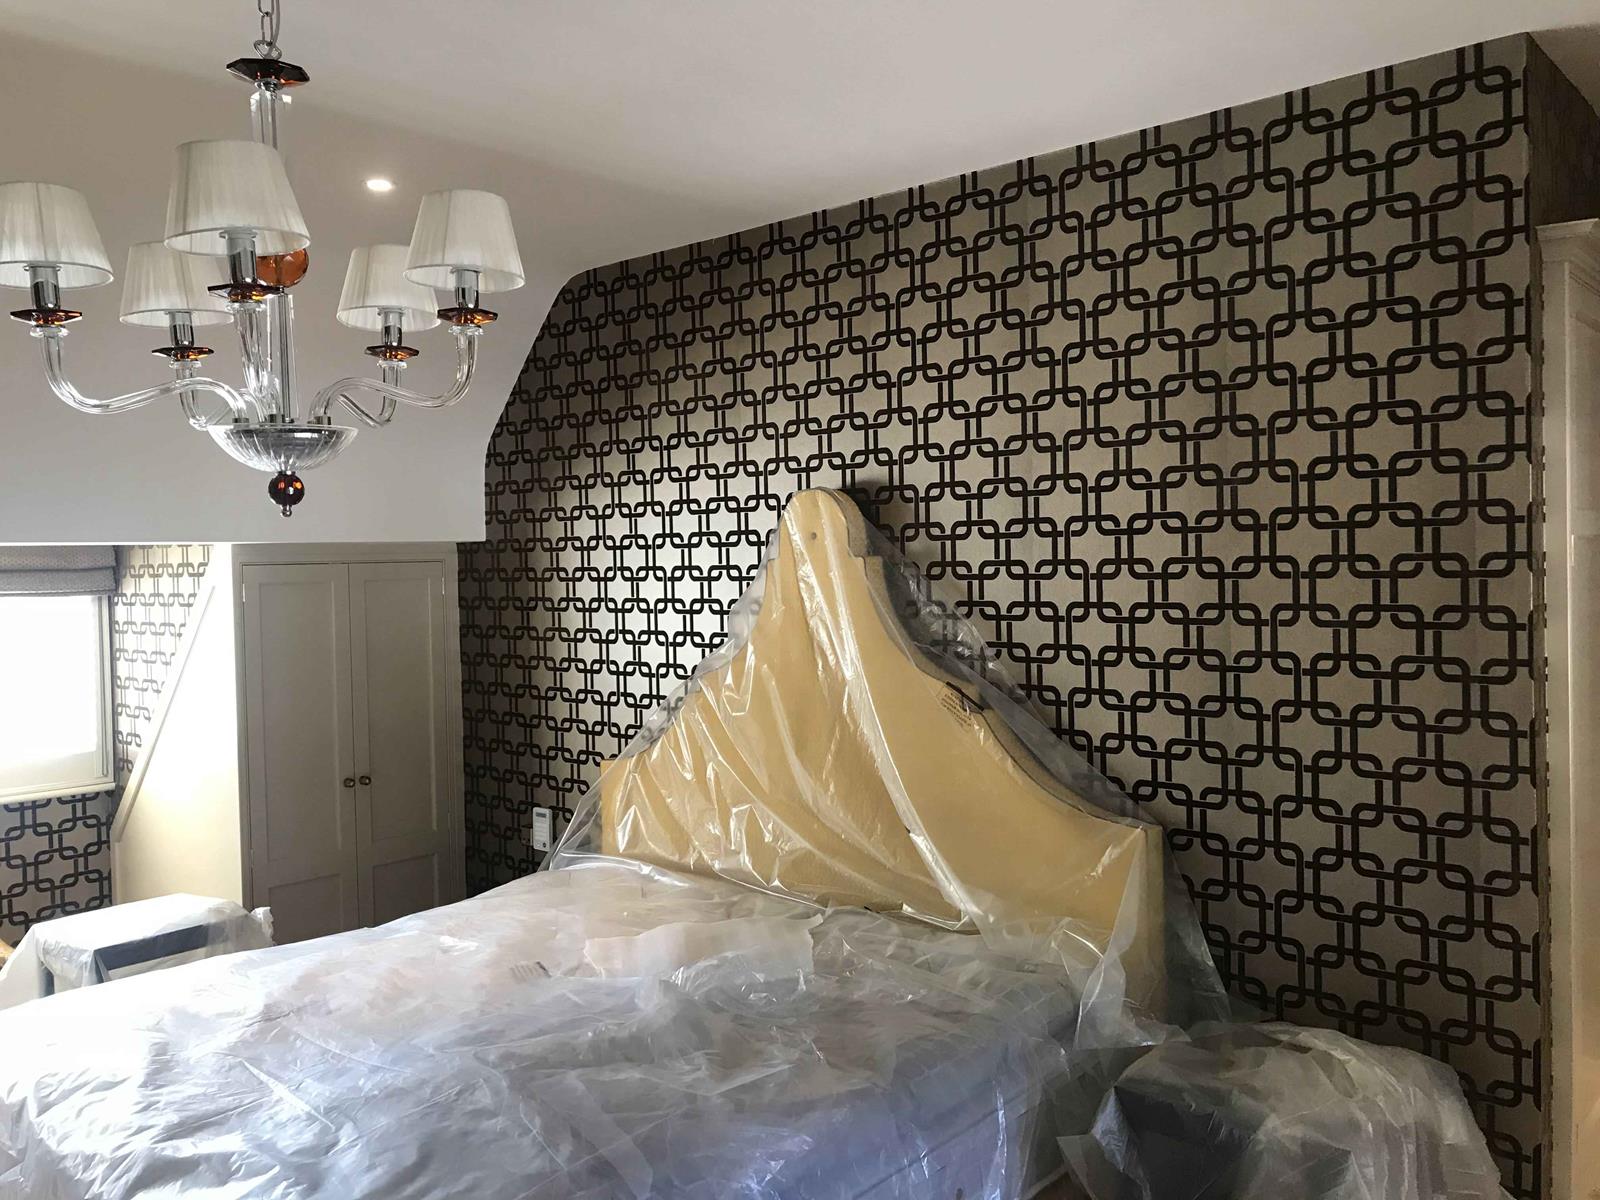 wallpaper-removal-London-painted-wallpaper-removal-London